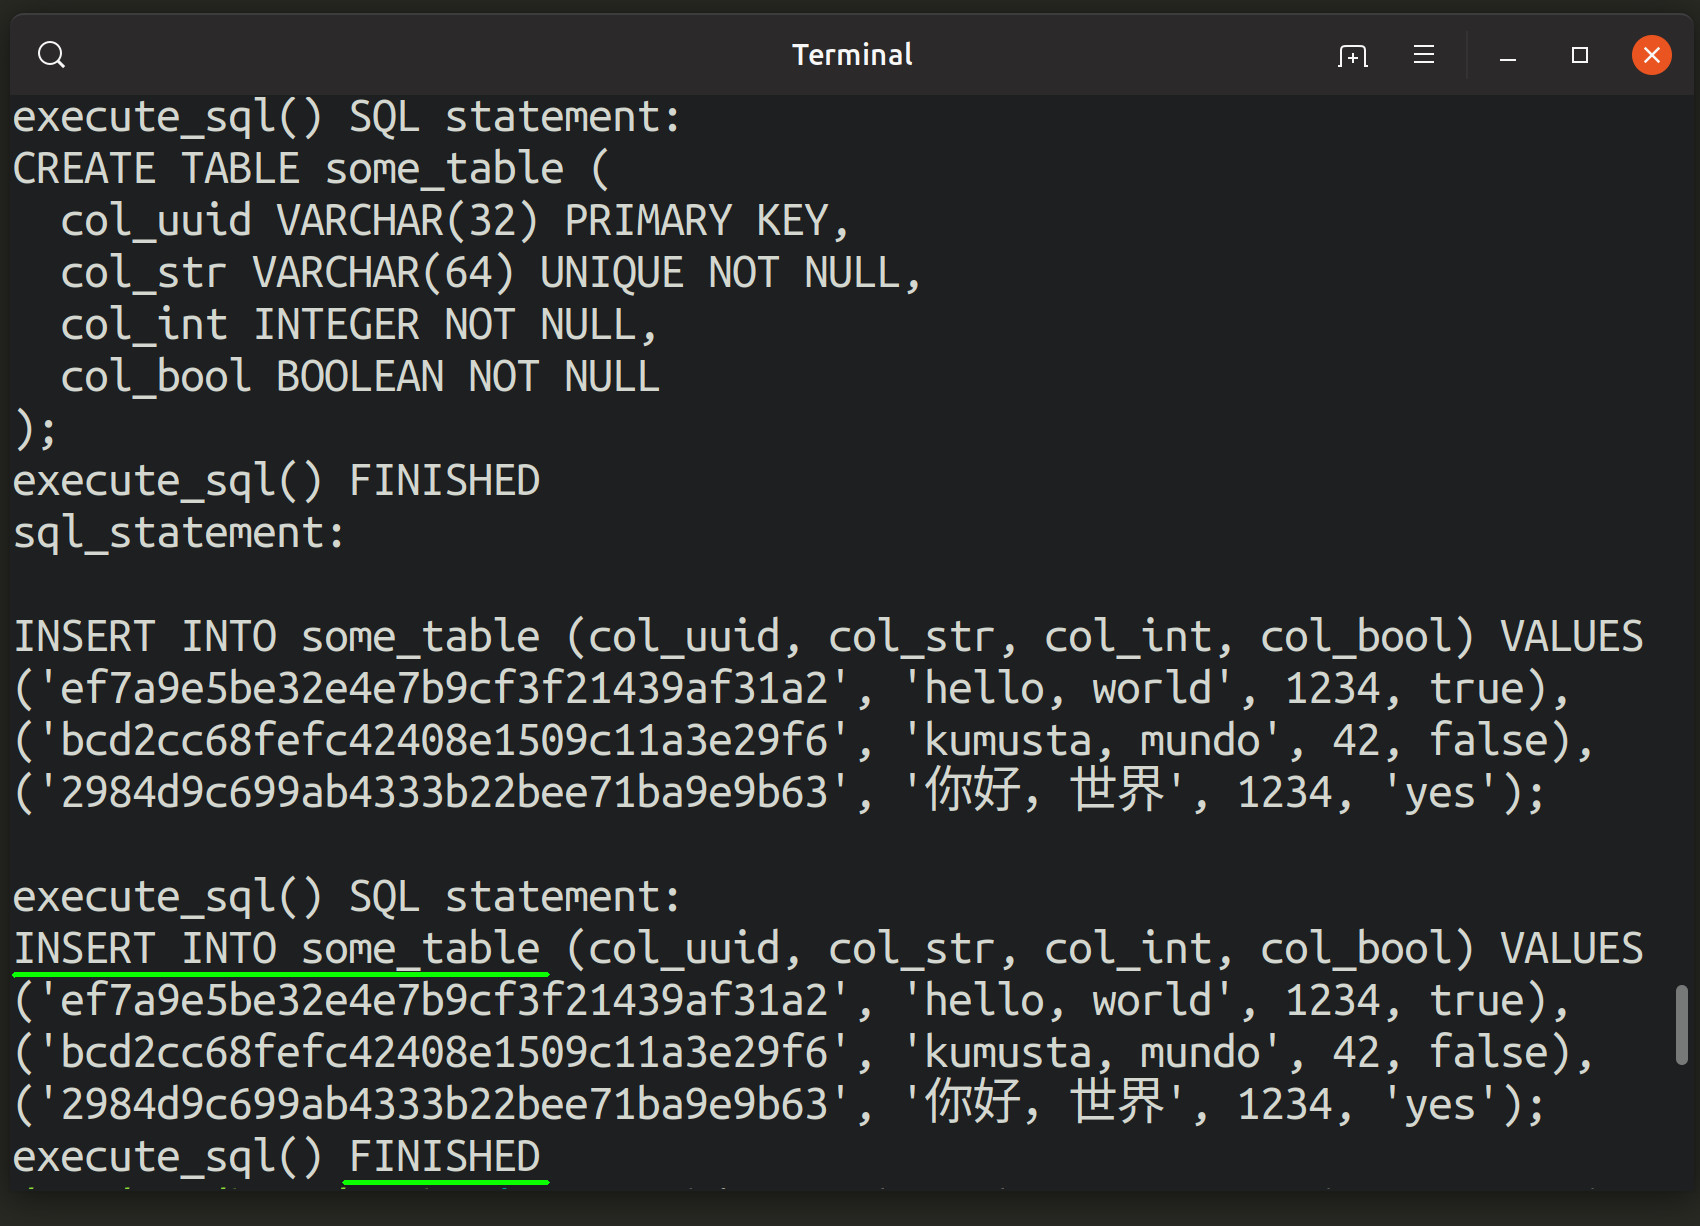 Screenshot of a Python script running in terminal to create a PostgreSQL table and insert rows of data